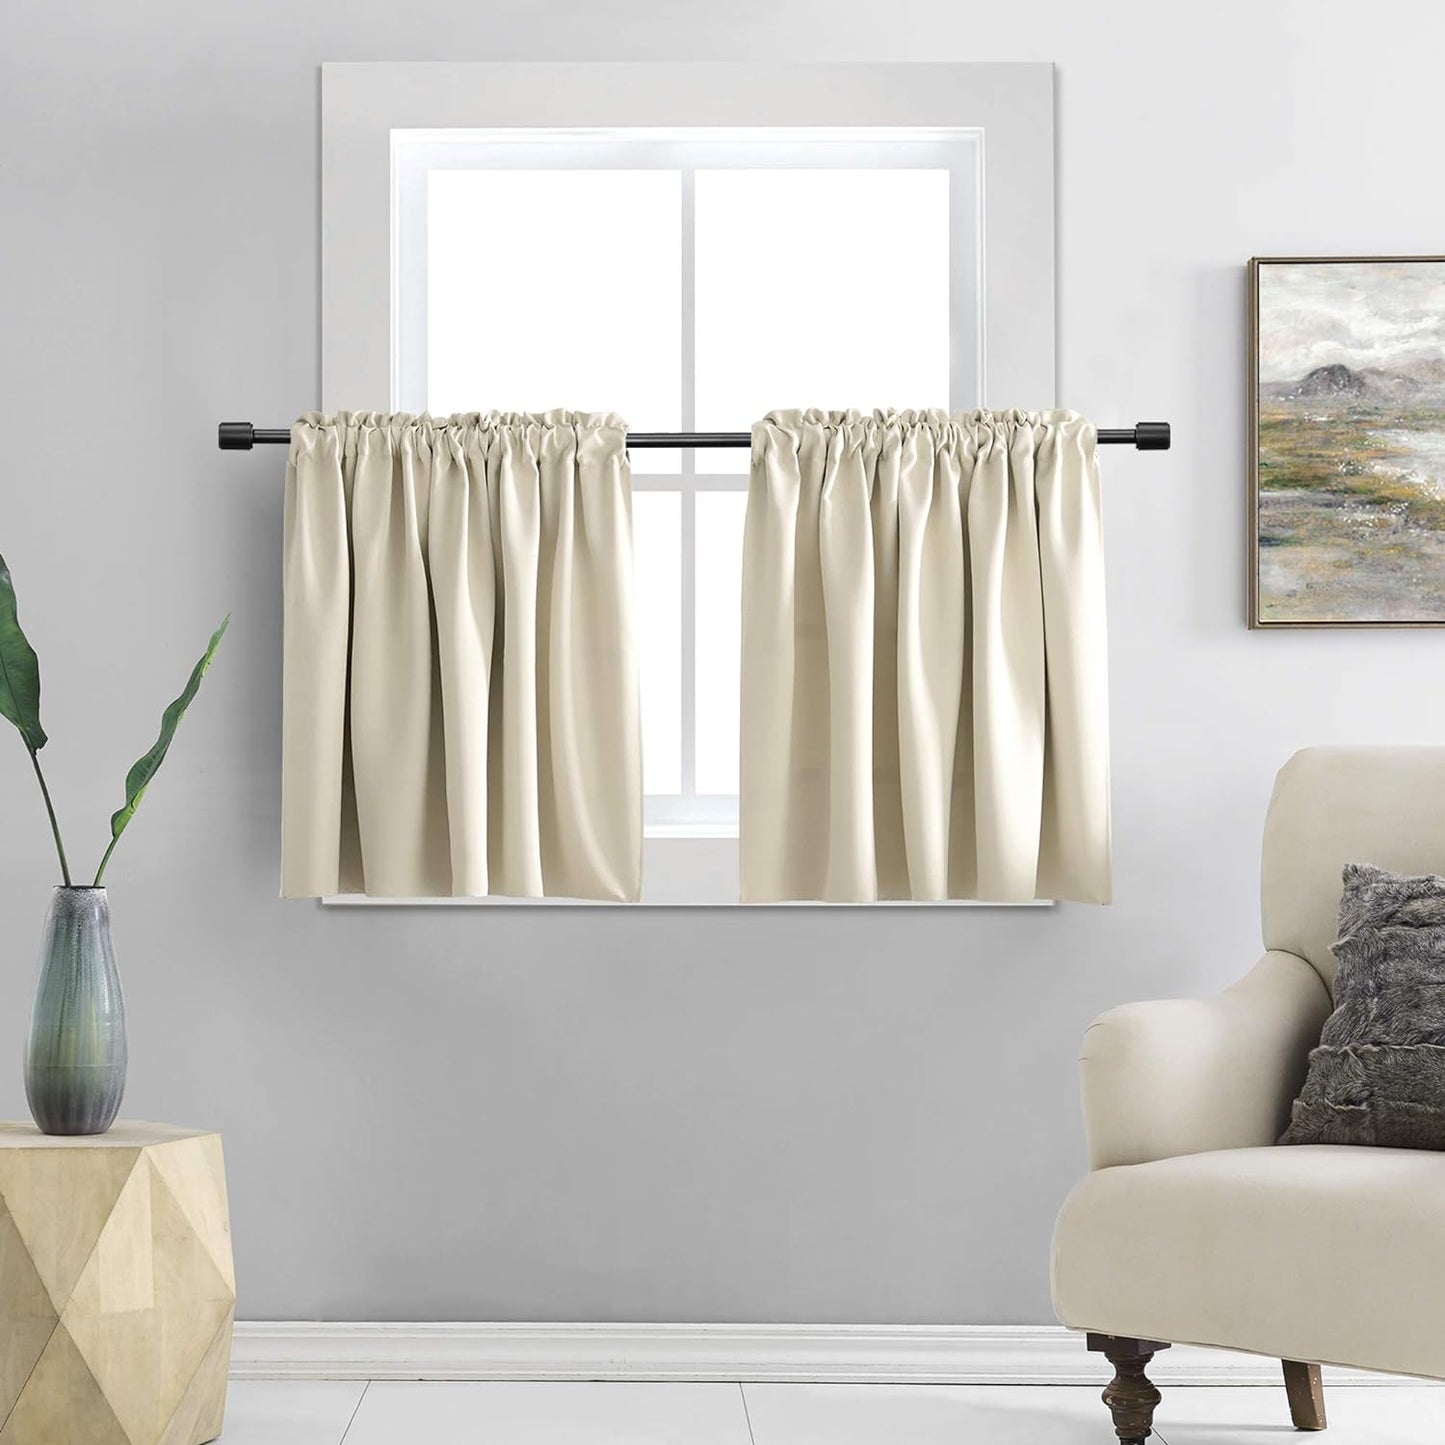 DONREN 24 Inch Length Curtains- 2 Panels Blackout Thermal Insulating Small Curtain Tiers for Bathroom with Rod Pocket (Black,42 Inch Width)  DONREN Cream Beige 42" X 30" 